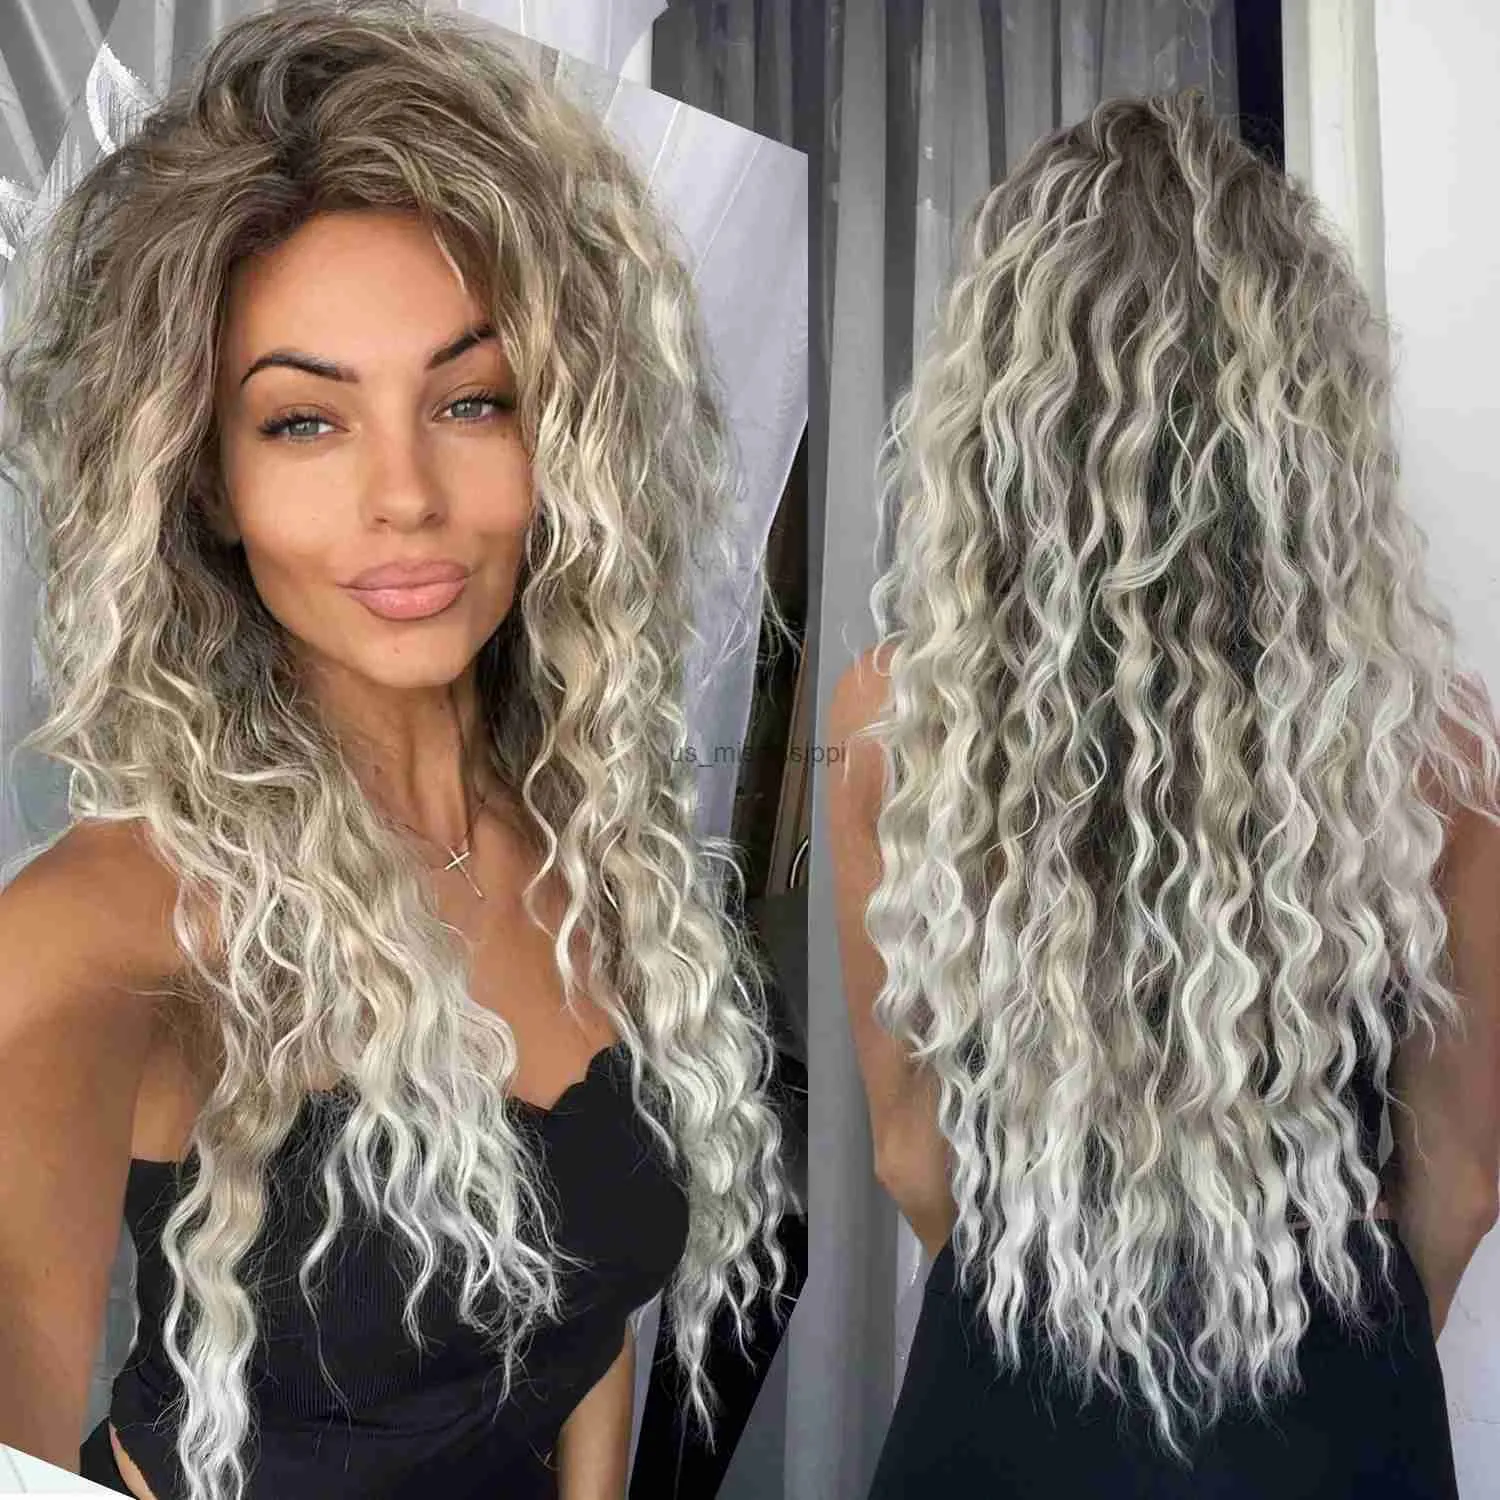 Synthetic Wigs Ash Blonde Wig Synthetic Long Curly Hair Wigs for Women Fluffy Hairstyle Wave Ombre Wig Costume Carnival Party Regular Curly WigL240124